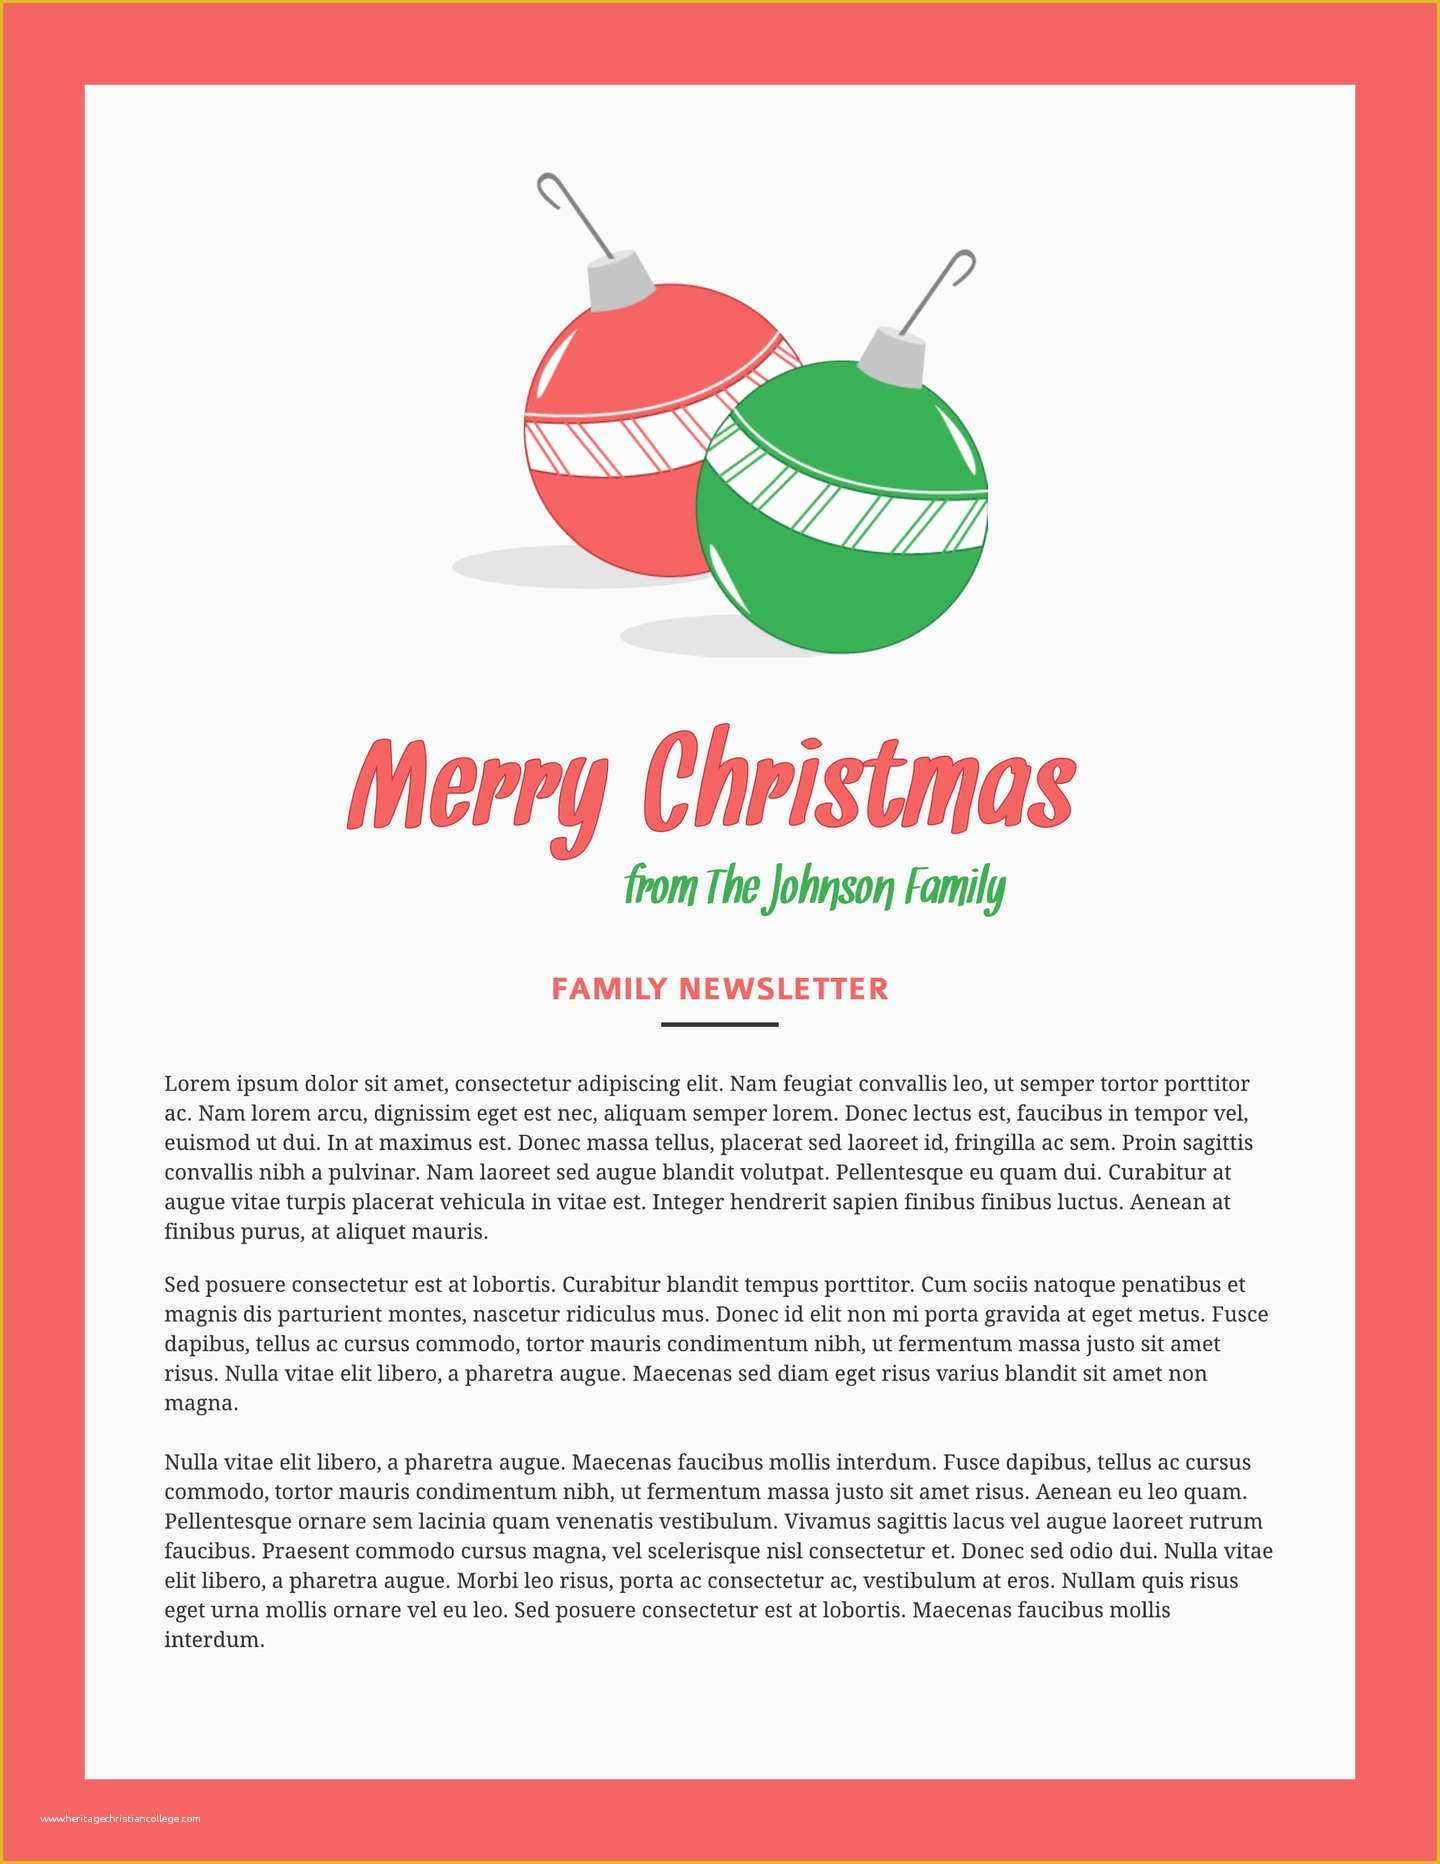 Holiday Family Newsletter Templates Free Of Print and Win Holiday Sweepstakes